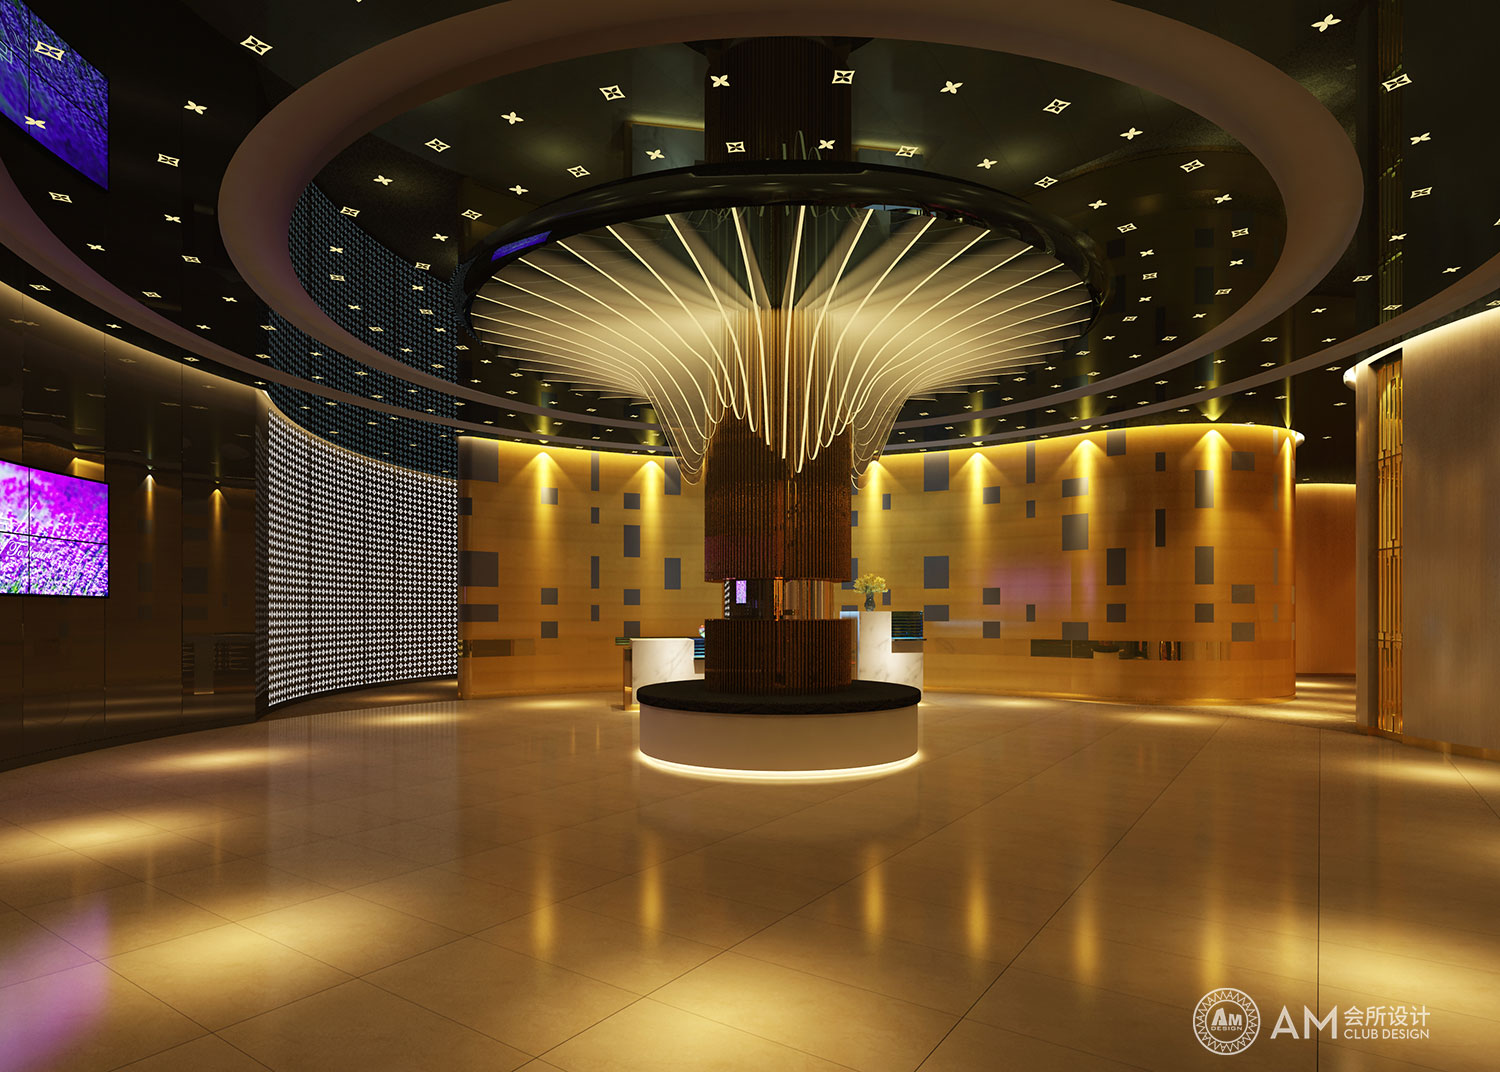 AM DESIGN | Lobby design of top spa spa in Sijihuacheng